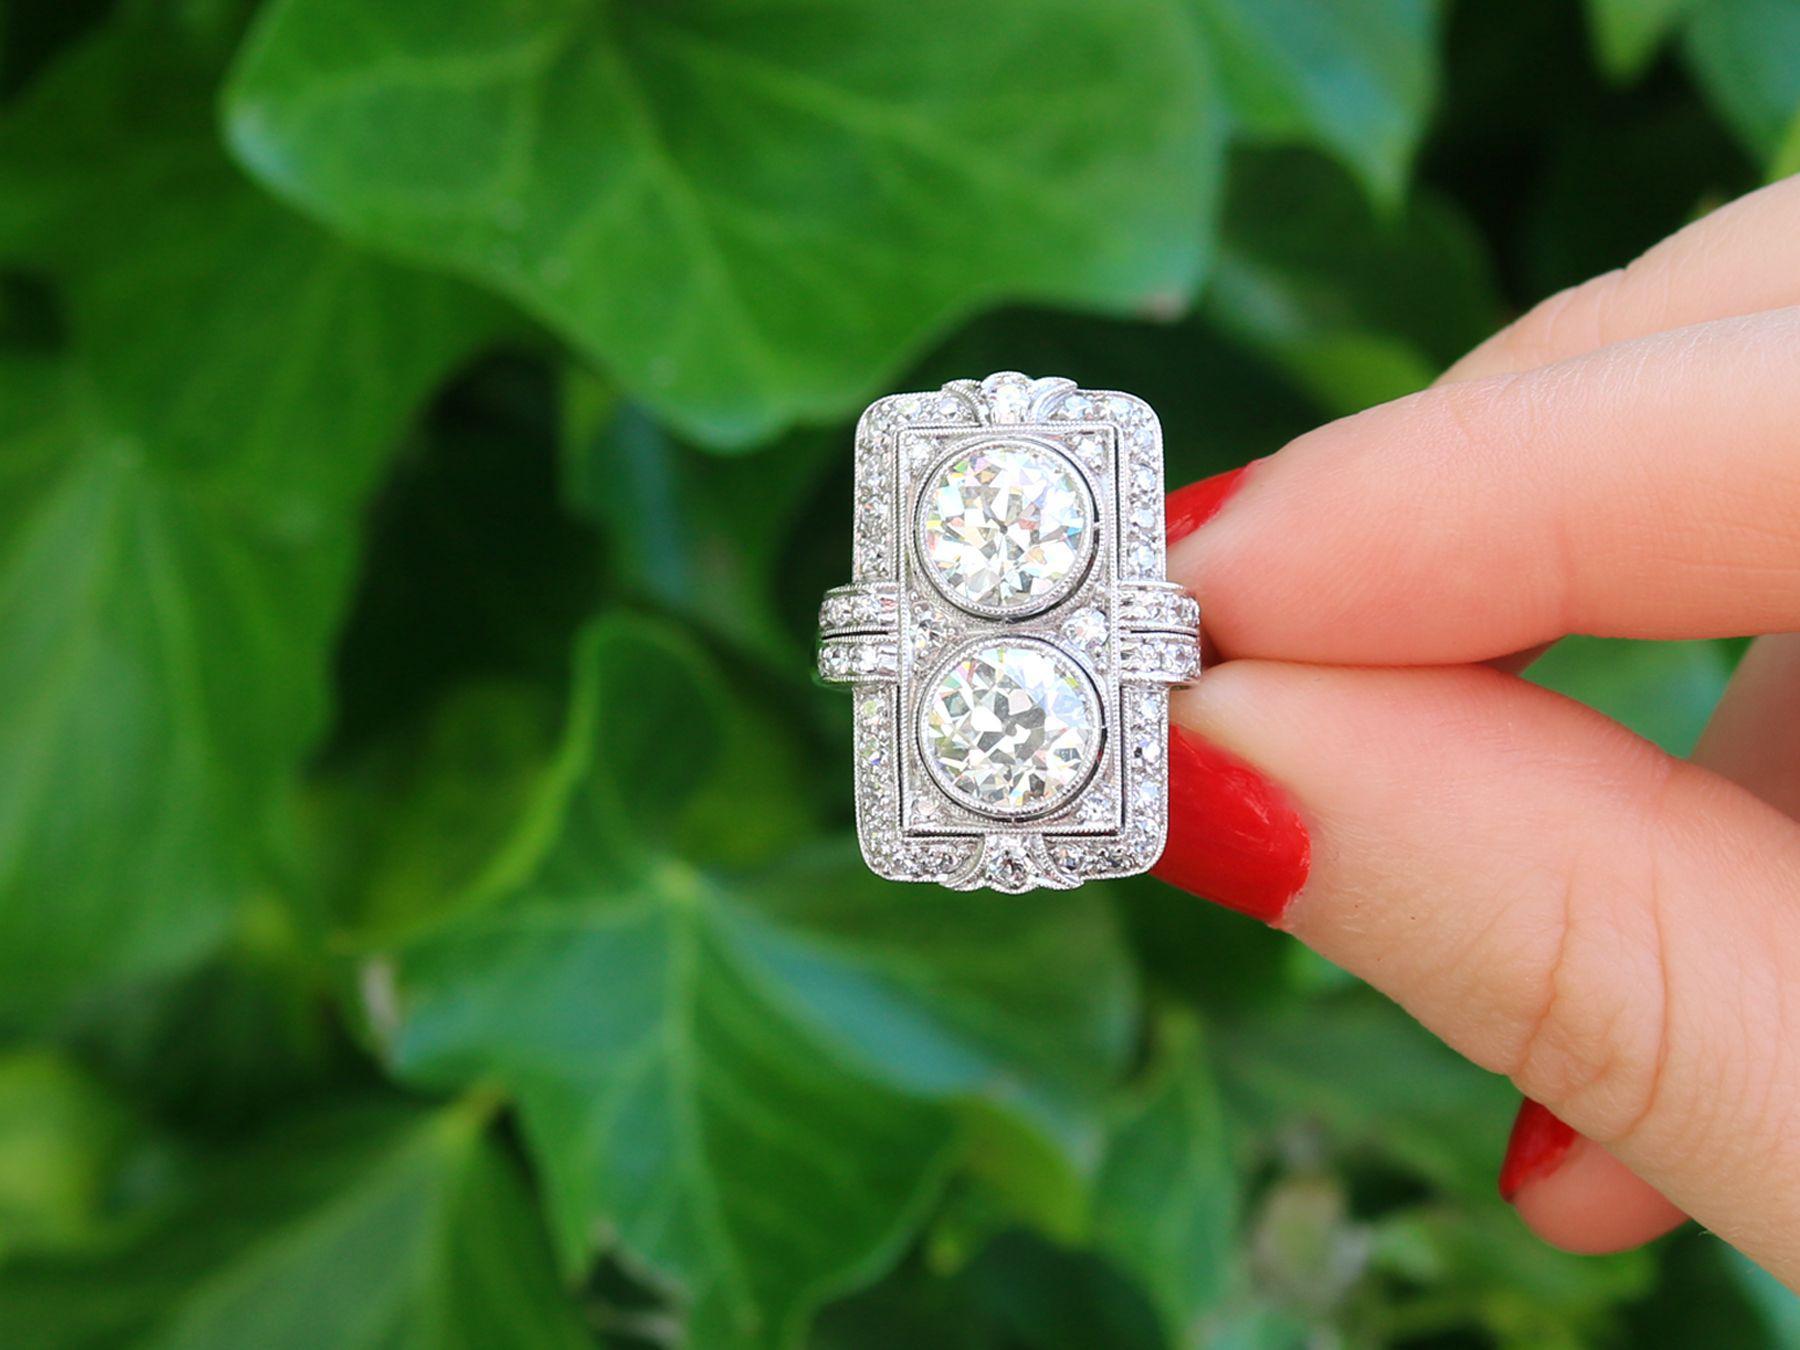 A stunning and exceptional, fine and impressive antique French 4.84 carat Art Deco diamond ring in platinum; part of our diverse jewelry and estate jewelry collections

This stunning, exceptional, fine and impressive antique French Art Deco diamond